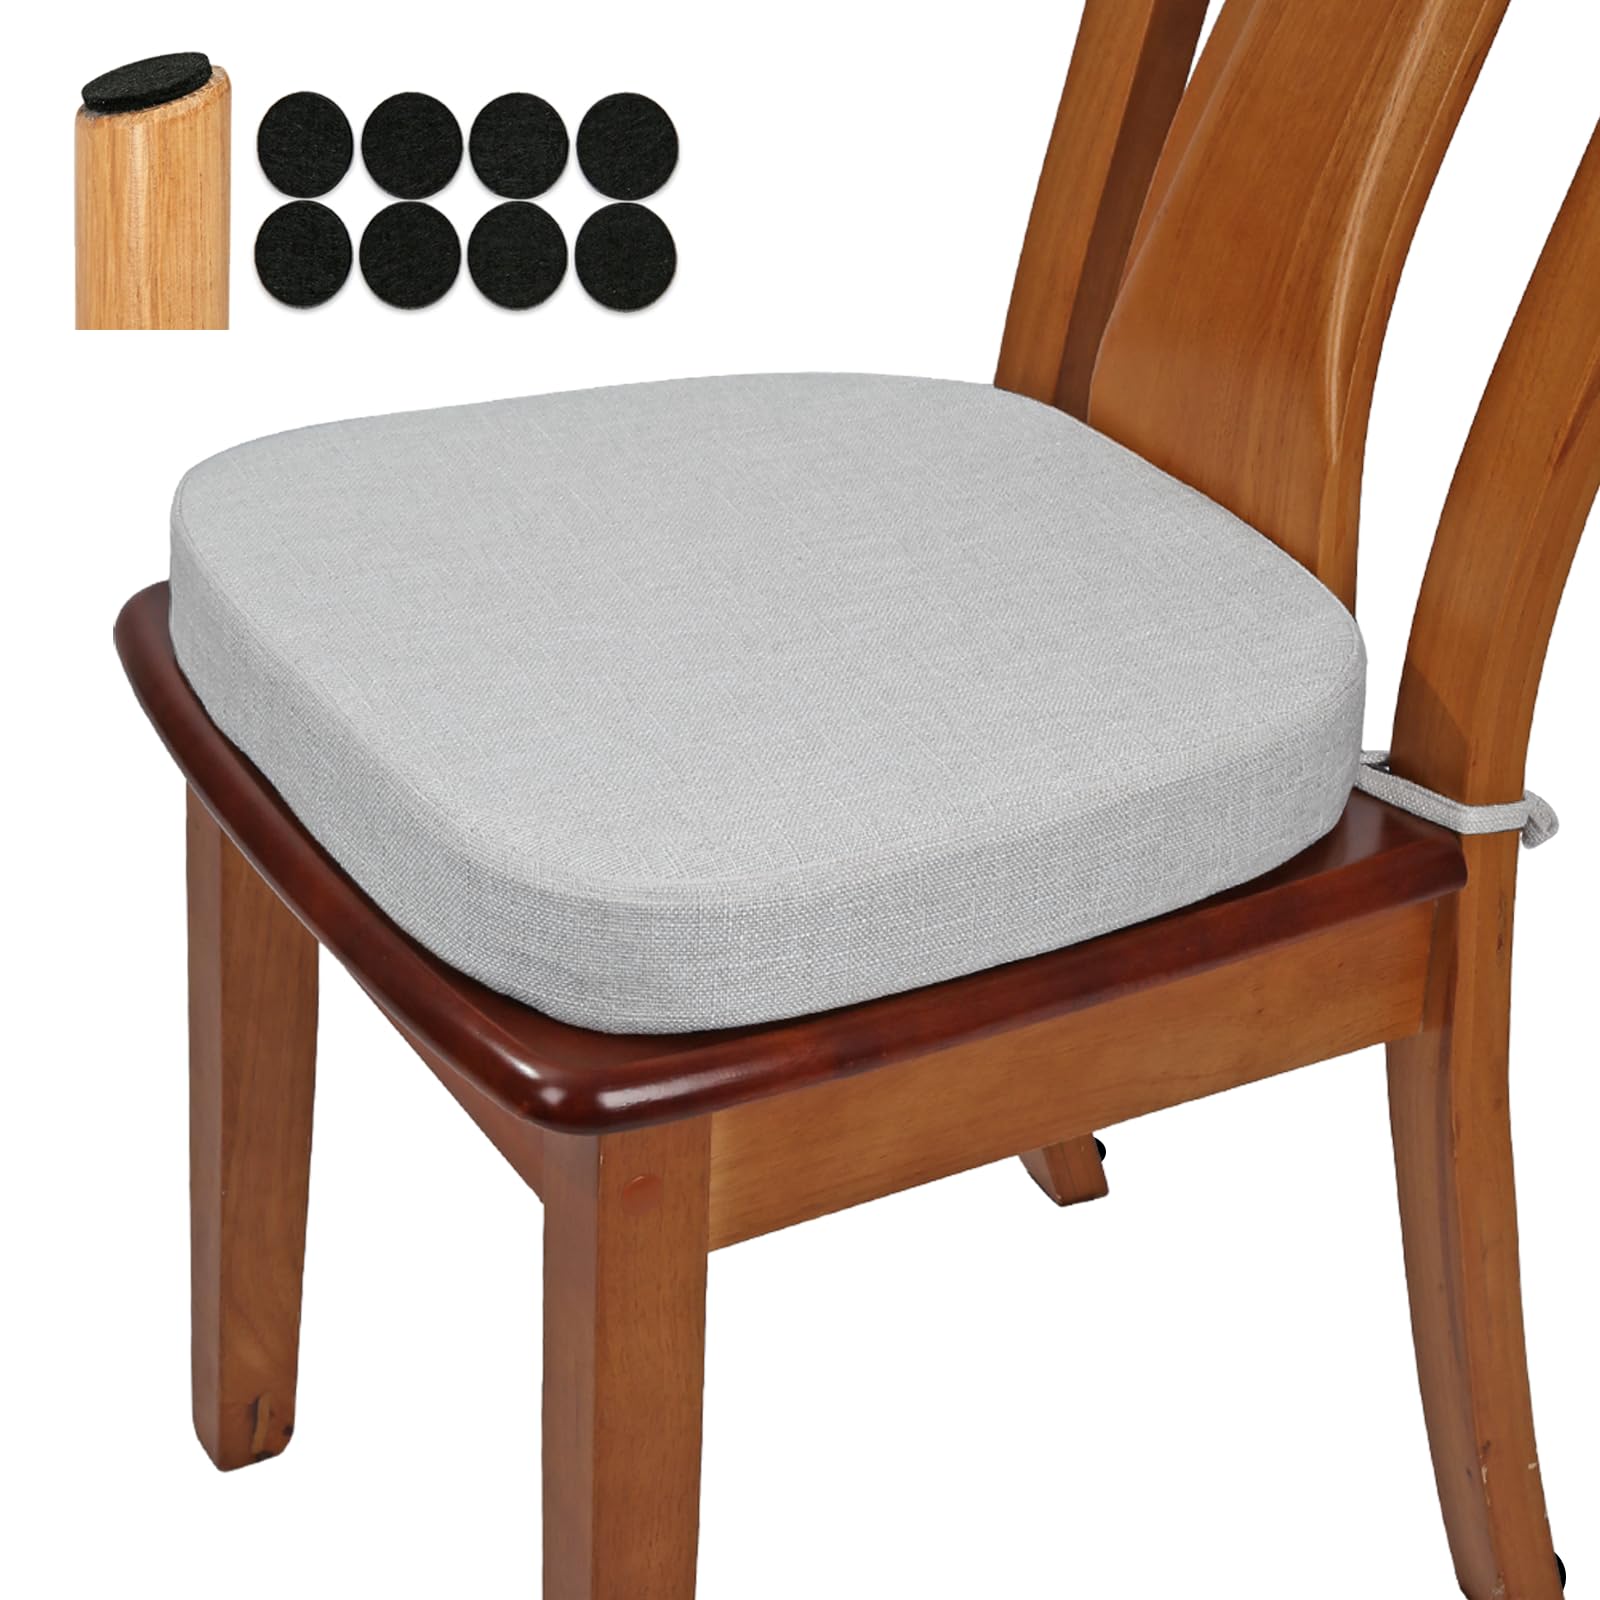 BUYUE Thickened 2.5" Original Linen Dining Chair Cushion, U-Shape High Density Foam Comfortable Chair Pad for Kitchen, Slip Resistant Indoor Seat Cushion (1 piece, Light Gray)